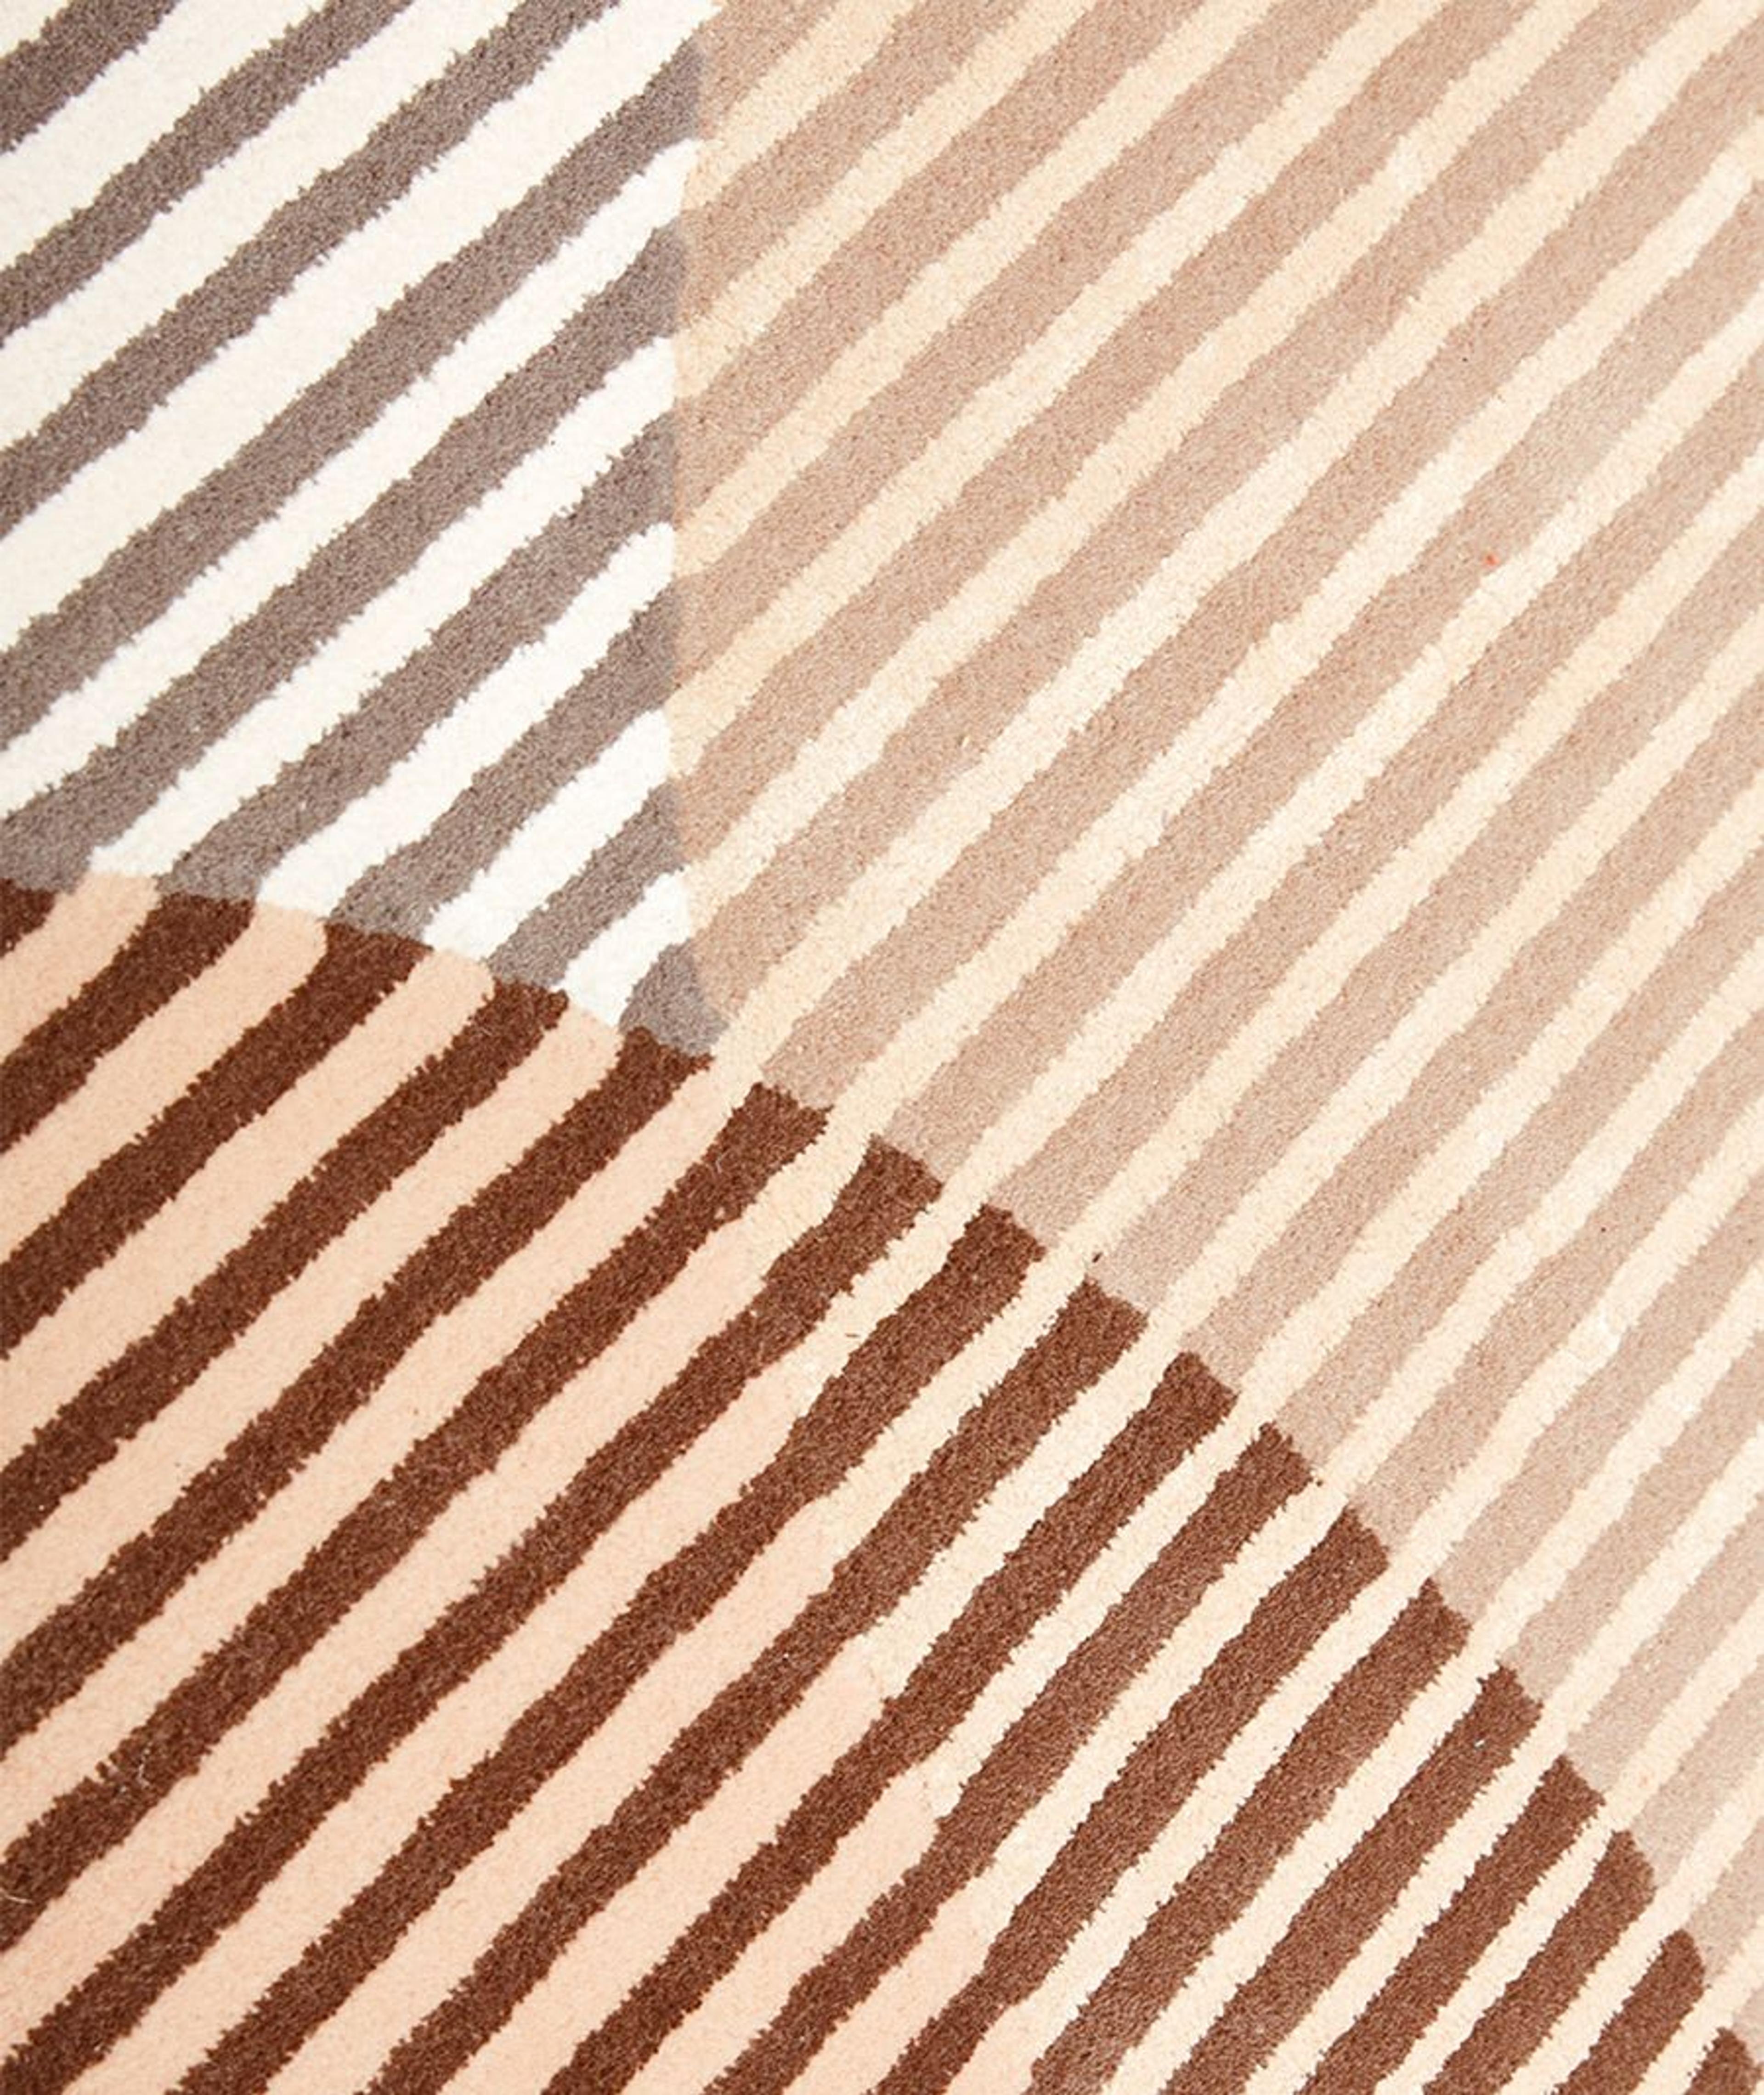 A detail of the hand-tufted wool rug, designed by Polish designer Alicia Palys for Nodus